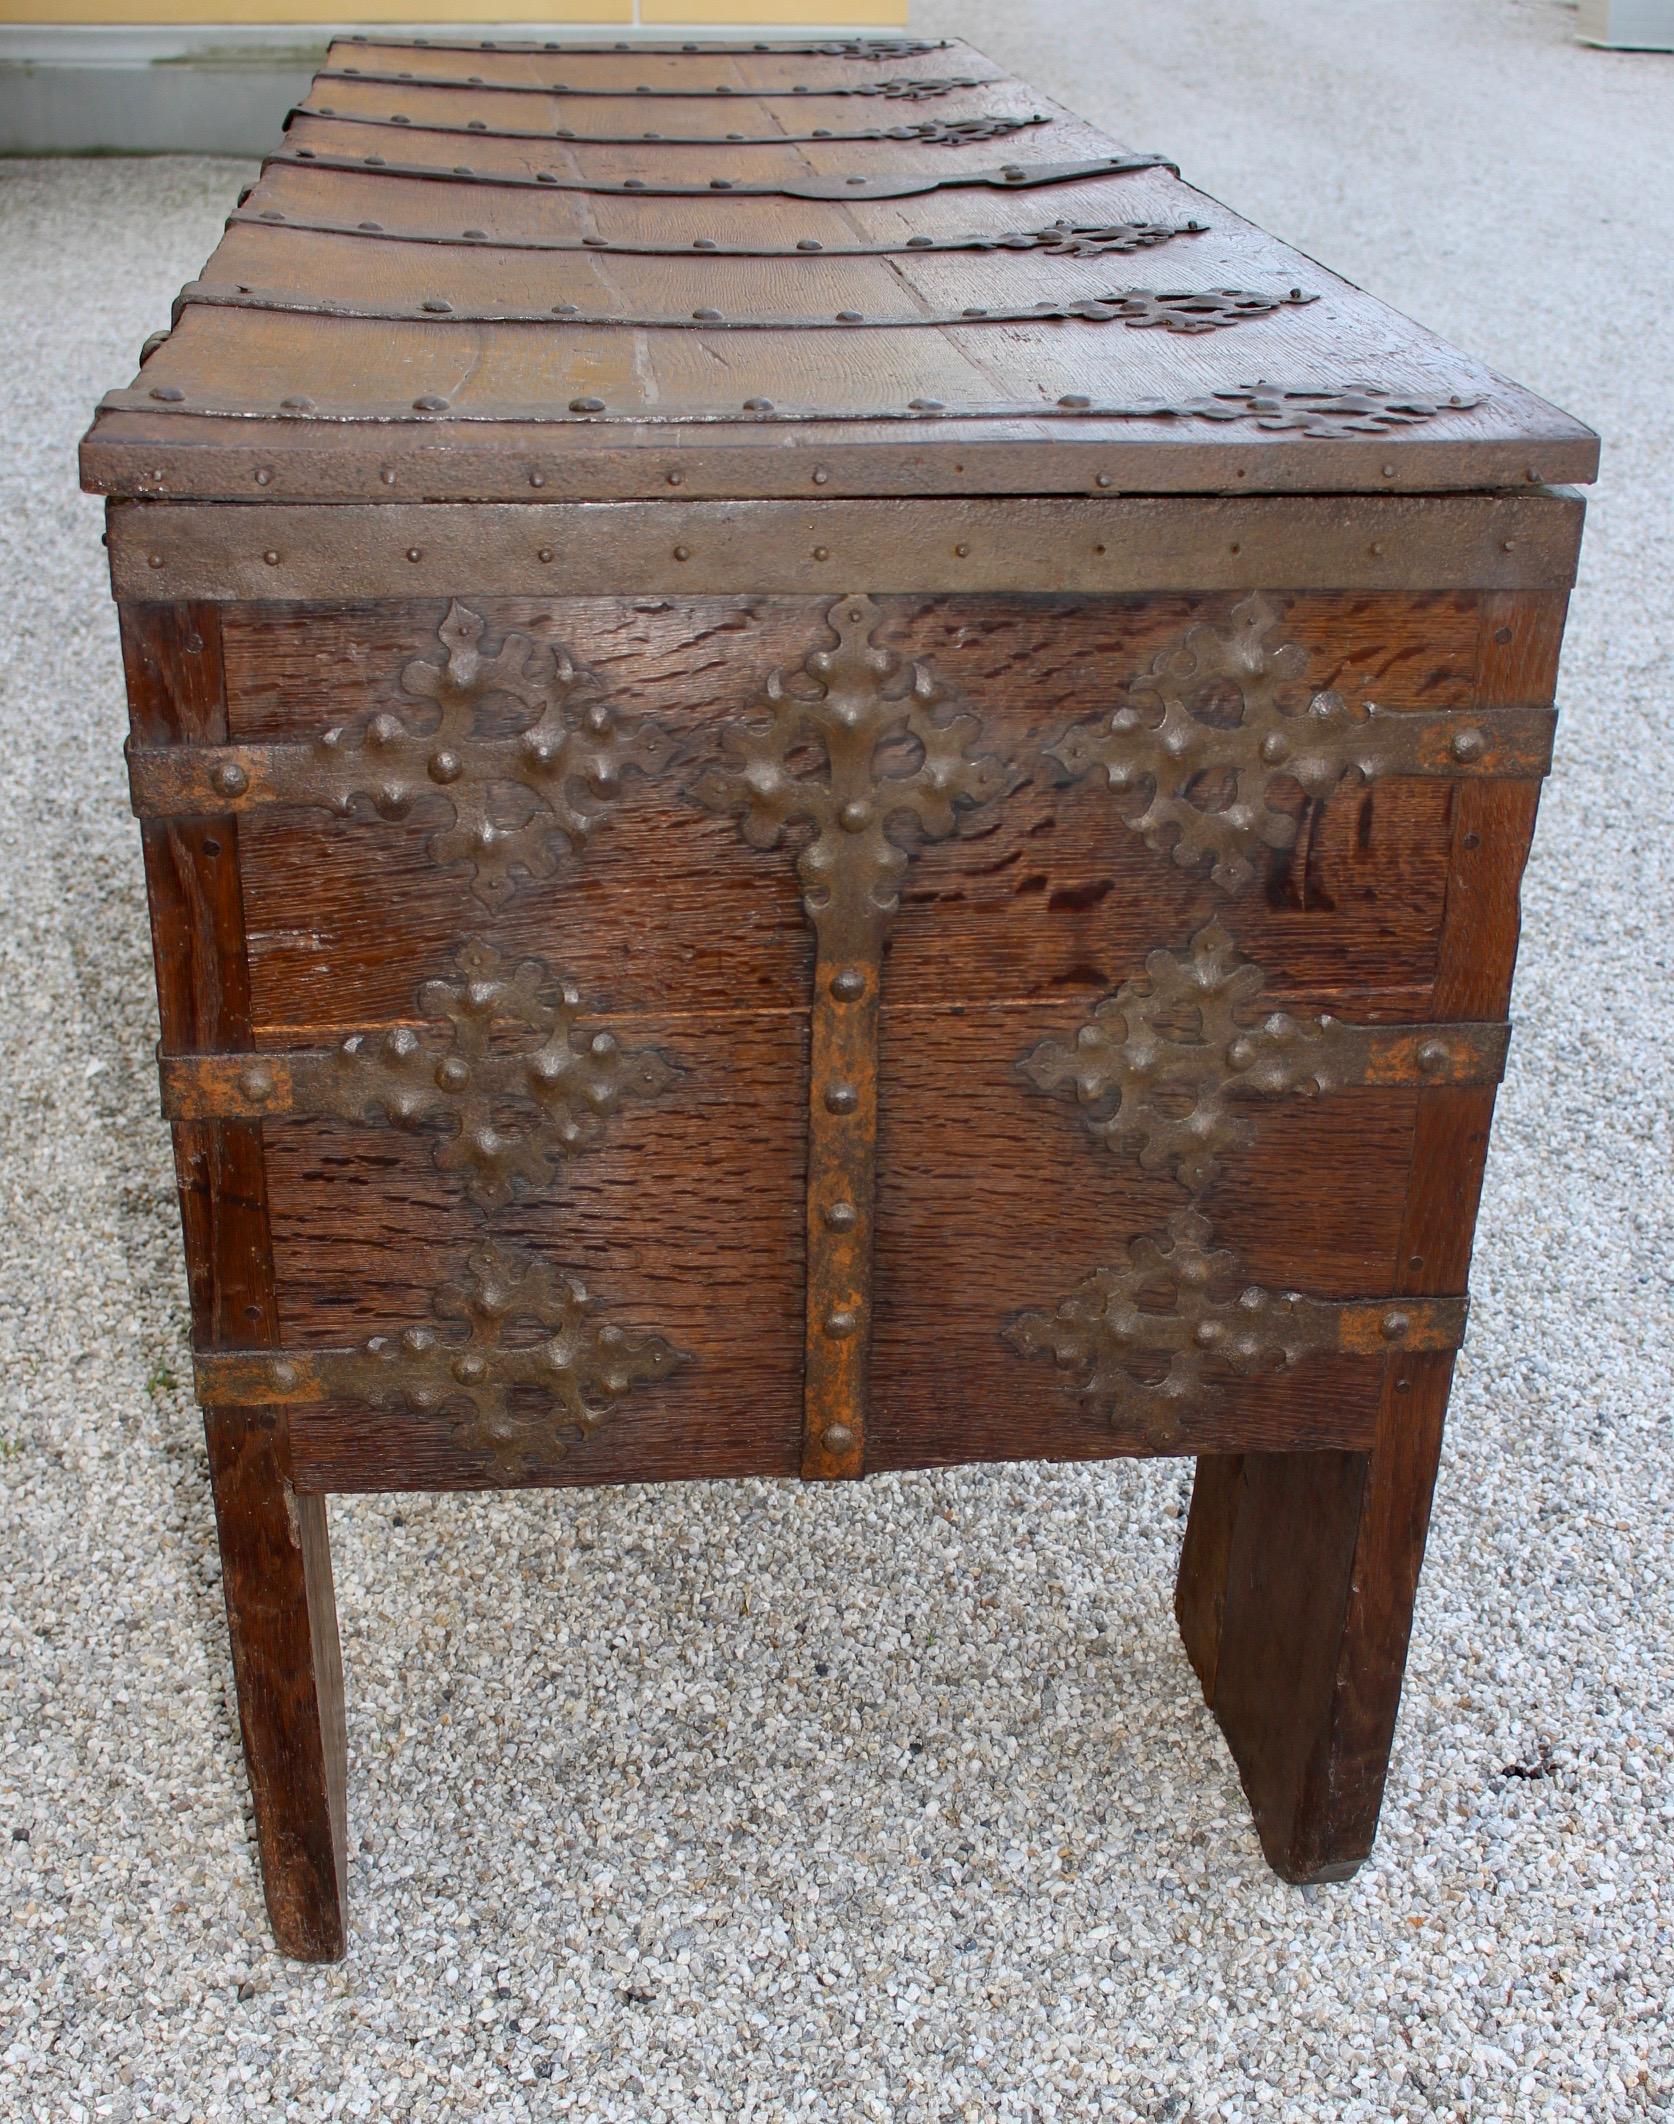 Rare Late Medieval 16th Century German Wrought Iron Oak Chest or Stollentruhe In Good Condition For Sale In Worpswede / Bremen, DE